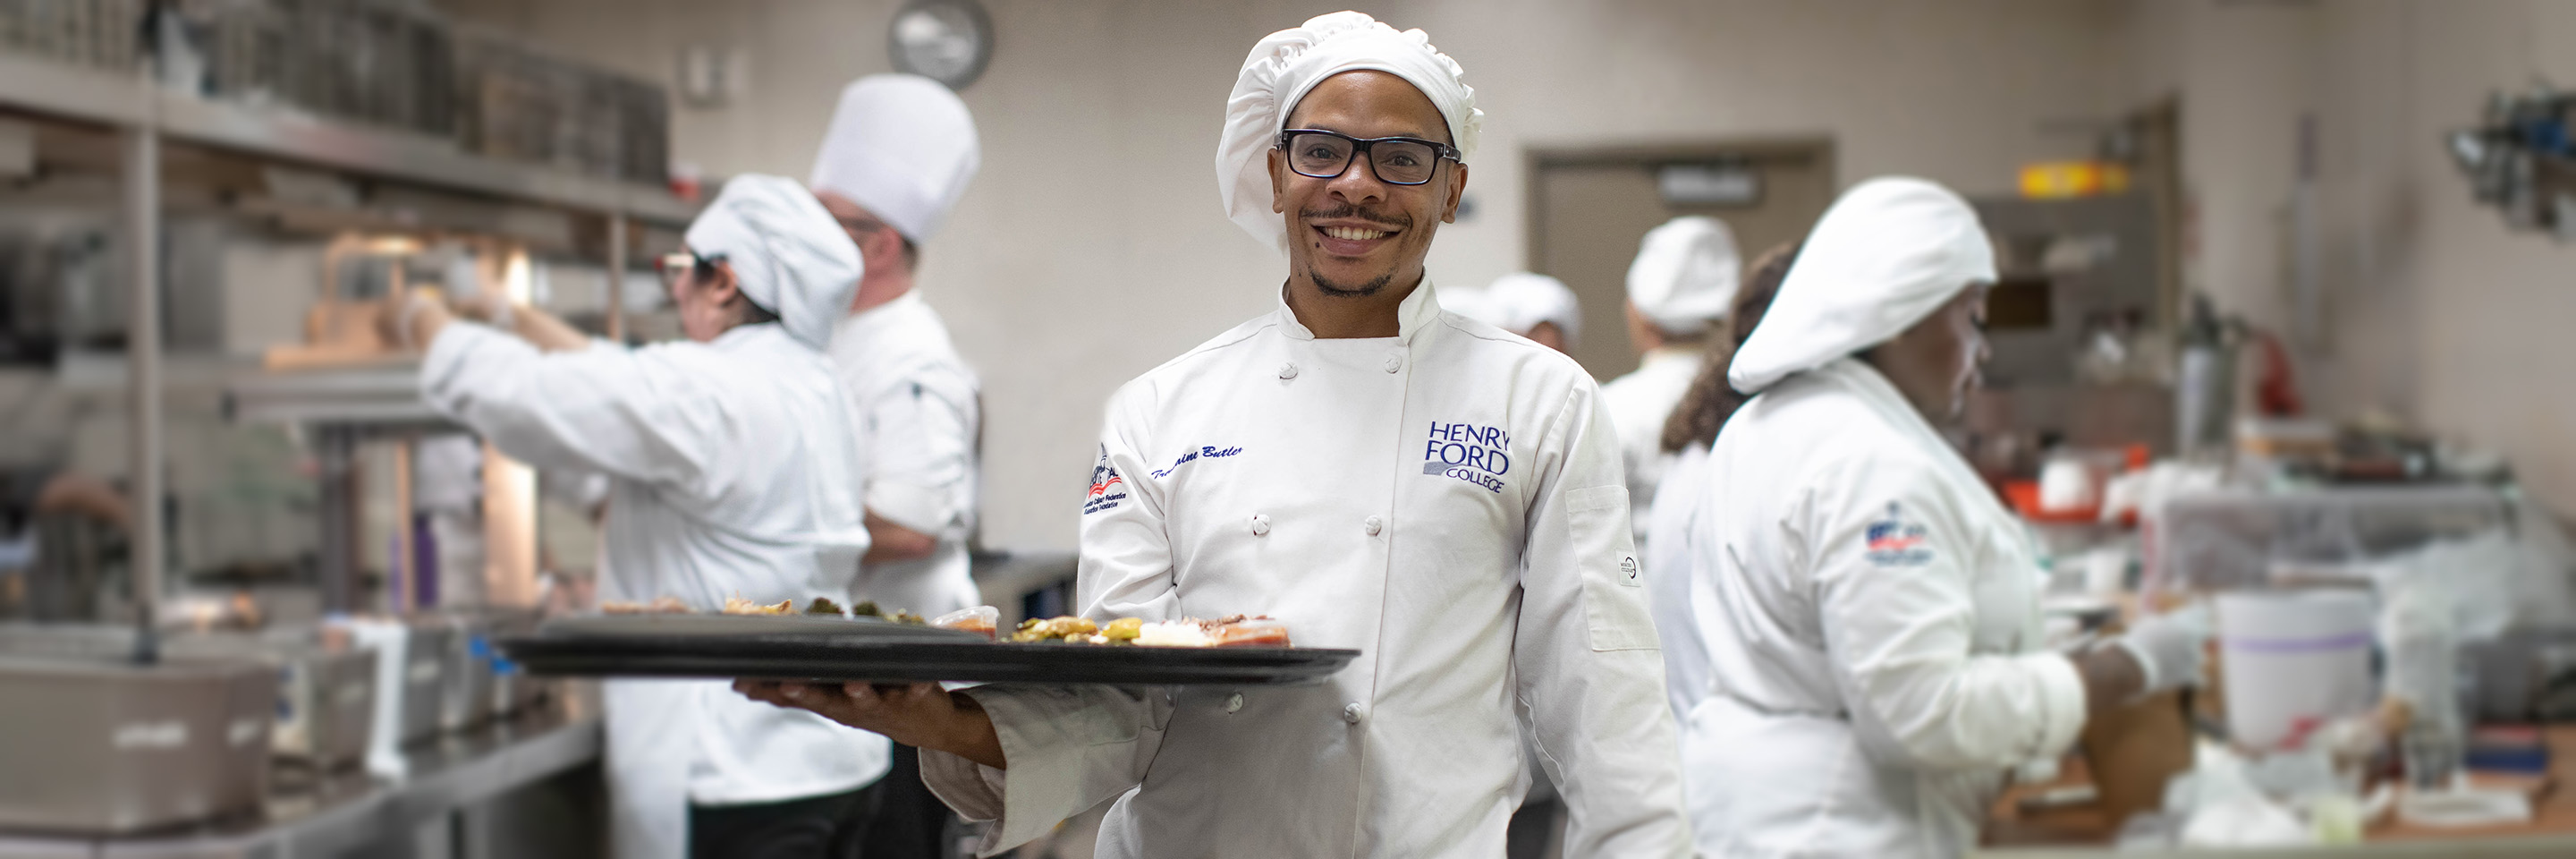 Culinary student proudly holding a tray of prepared food in one of HFC's kitchens, with other students cooking and prepping in the background